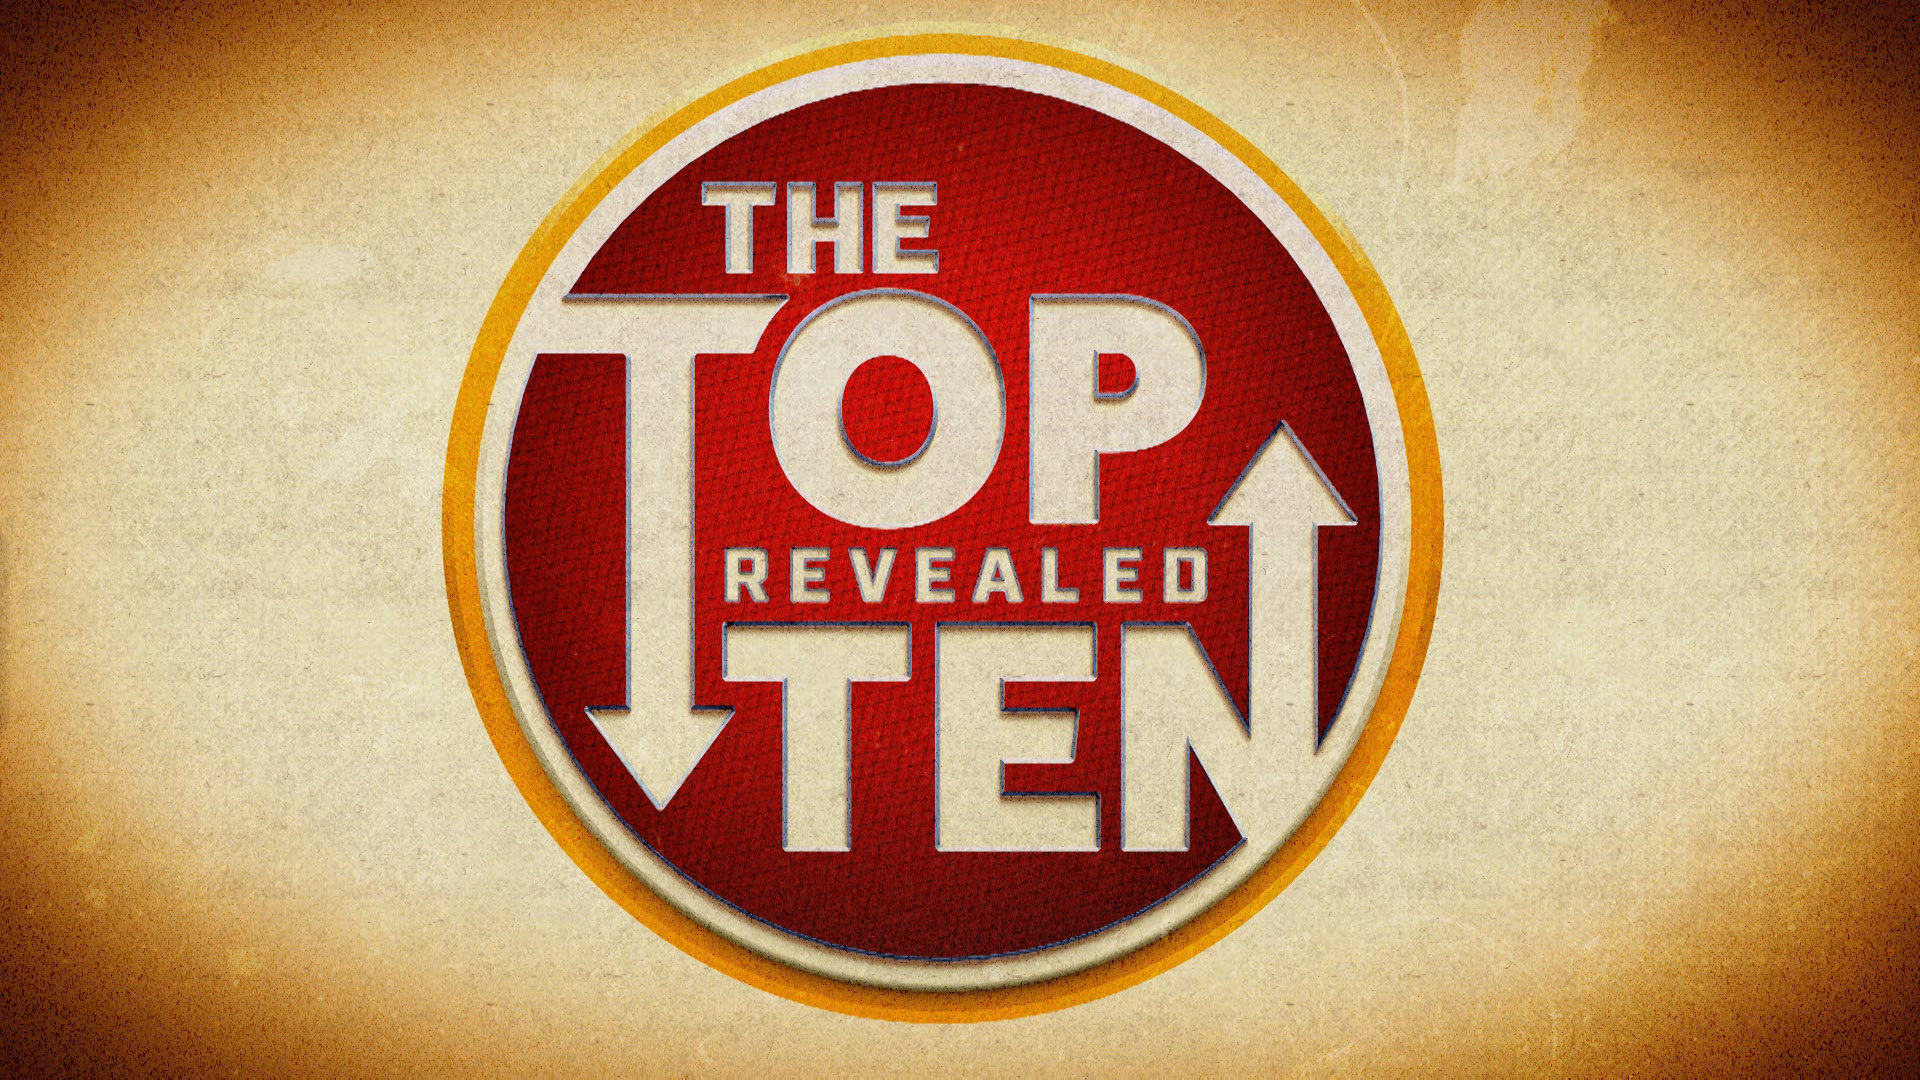 The Top Ten Revealed (TV Series 2018 Now)